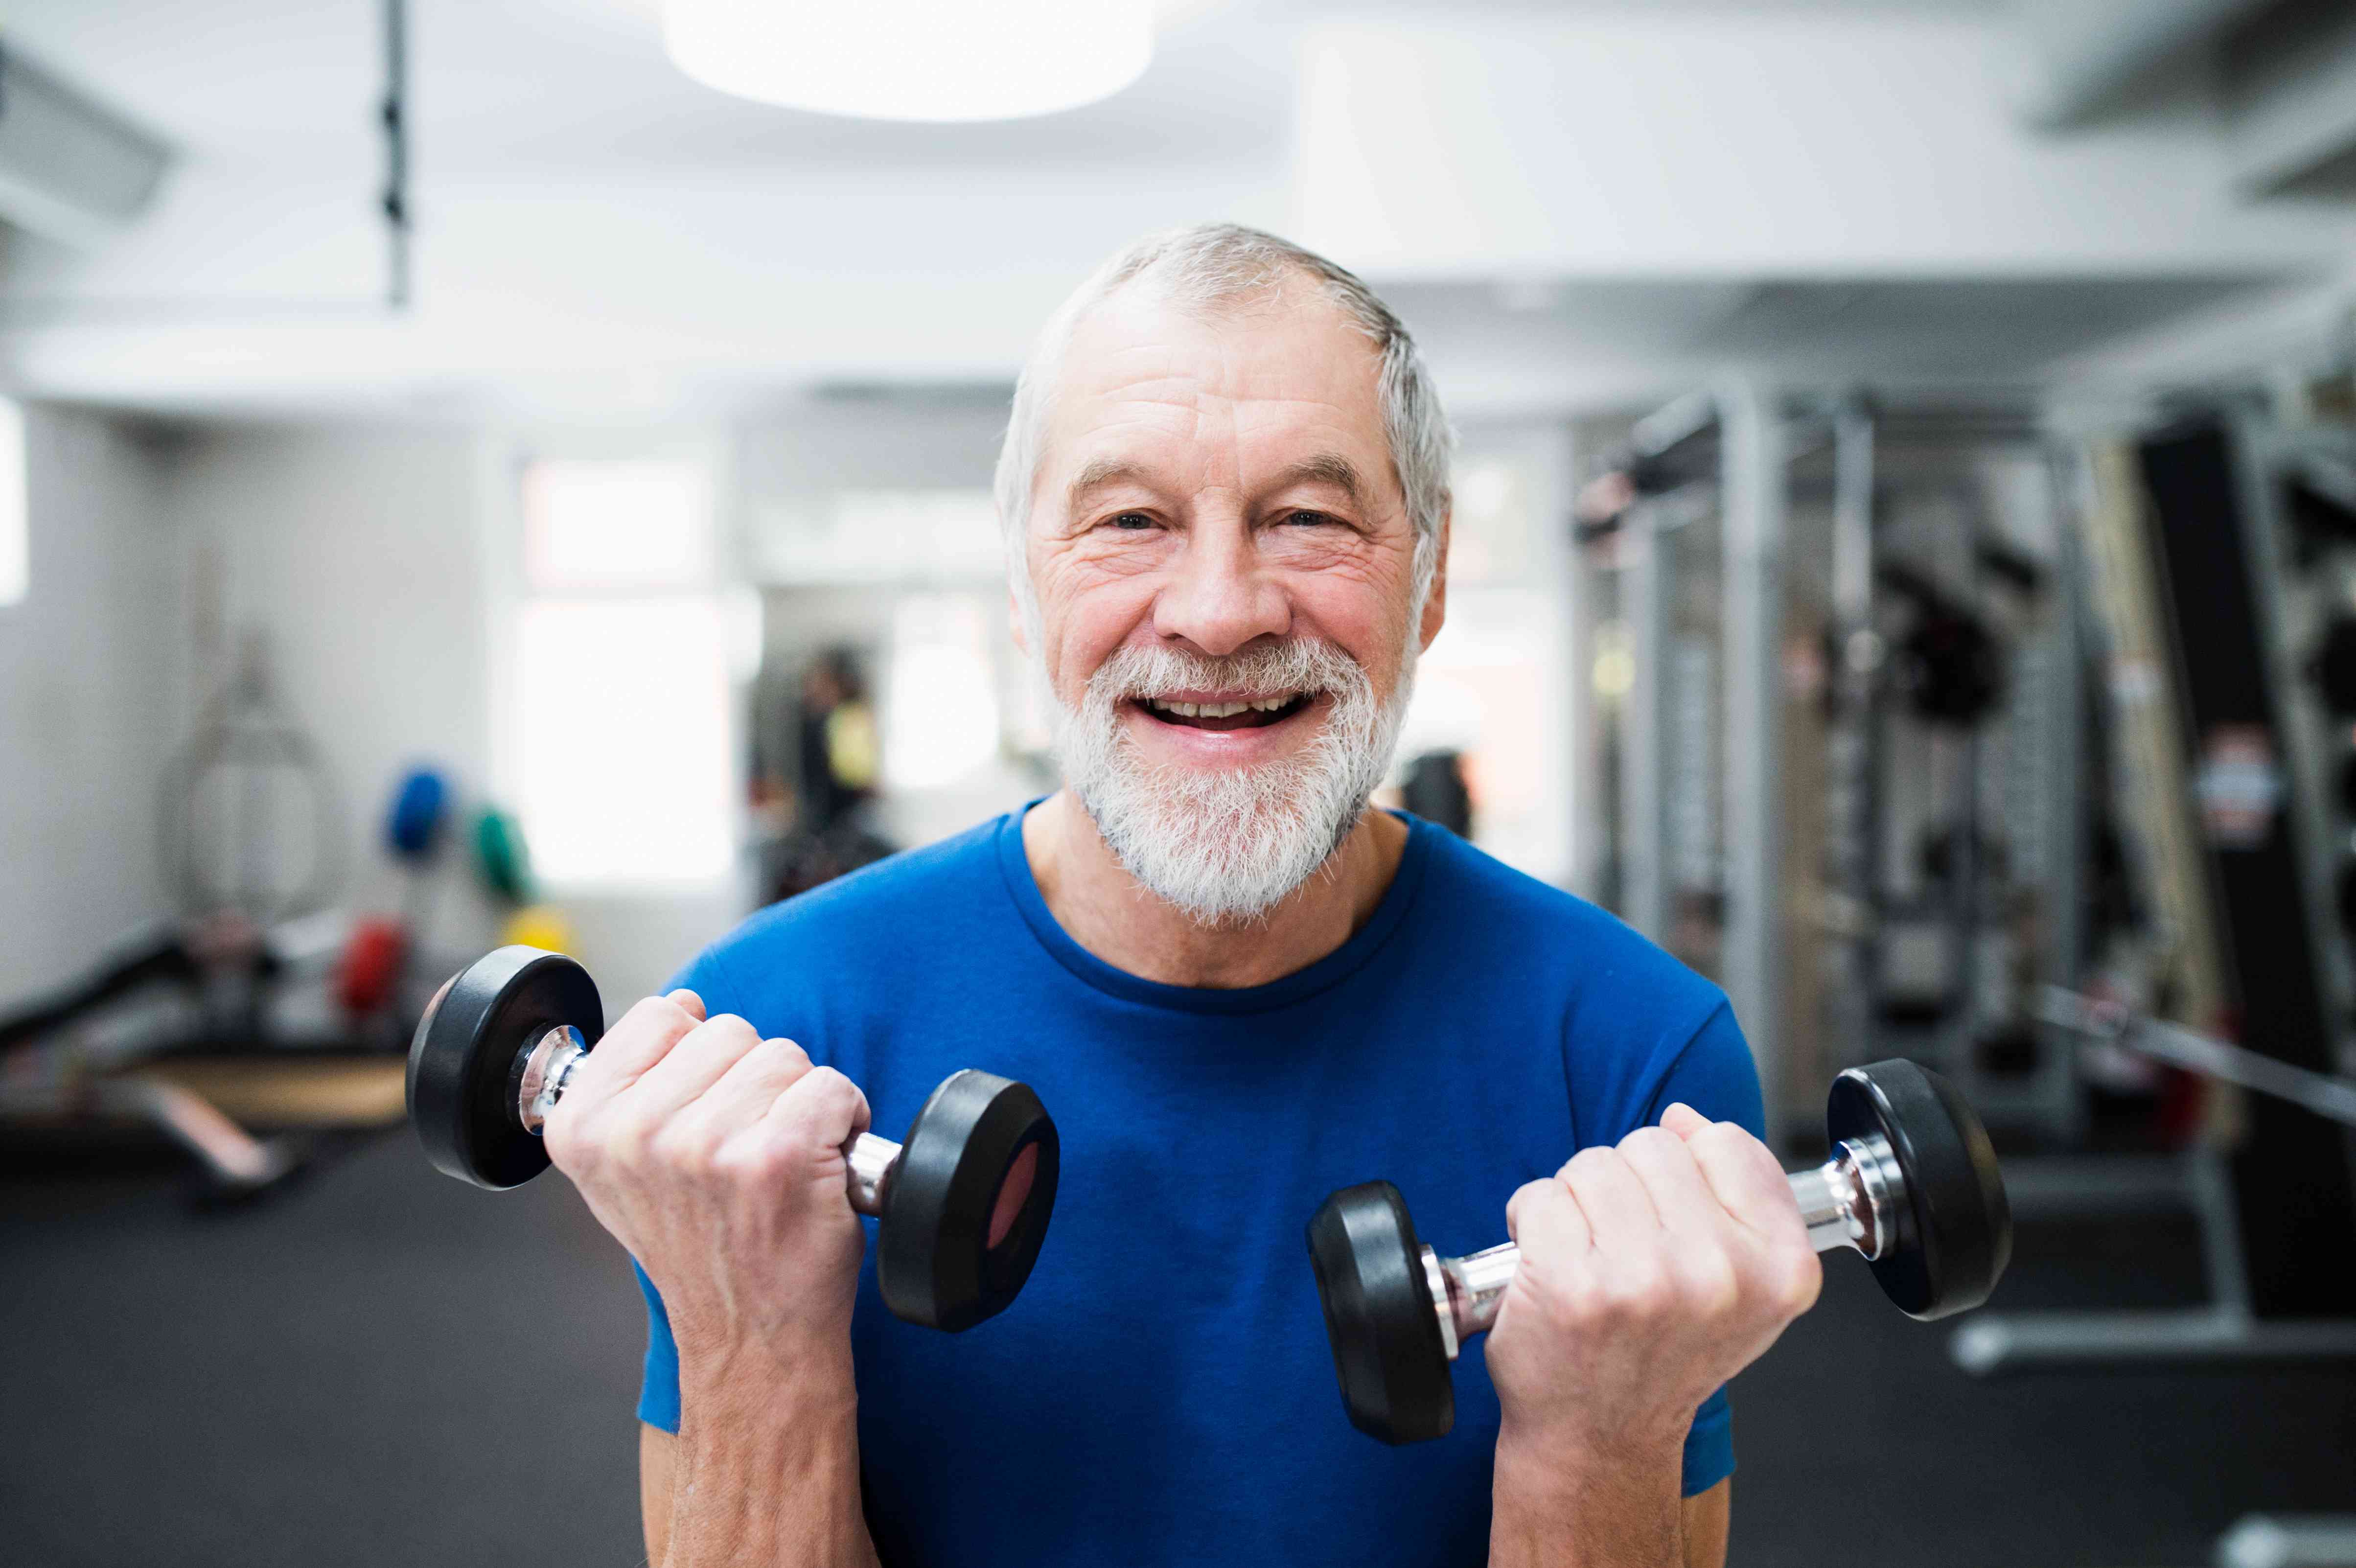 30-Minute Low Impact Workout Routine for Seniors